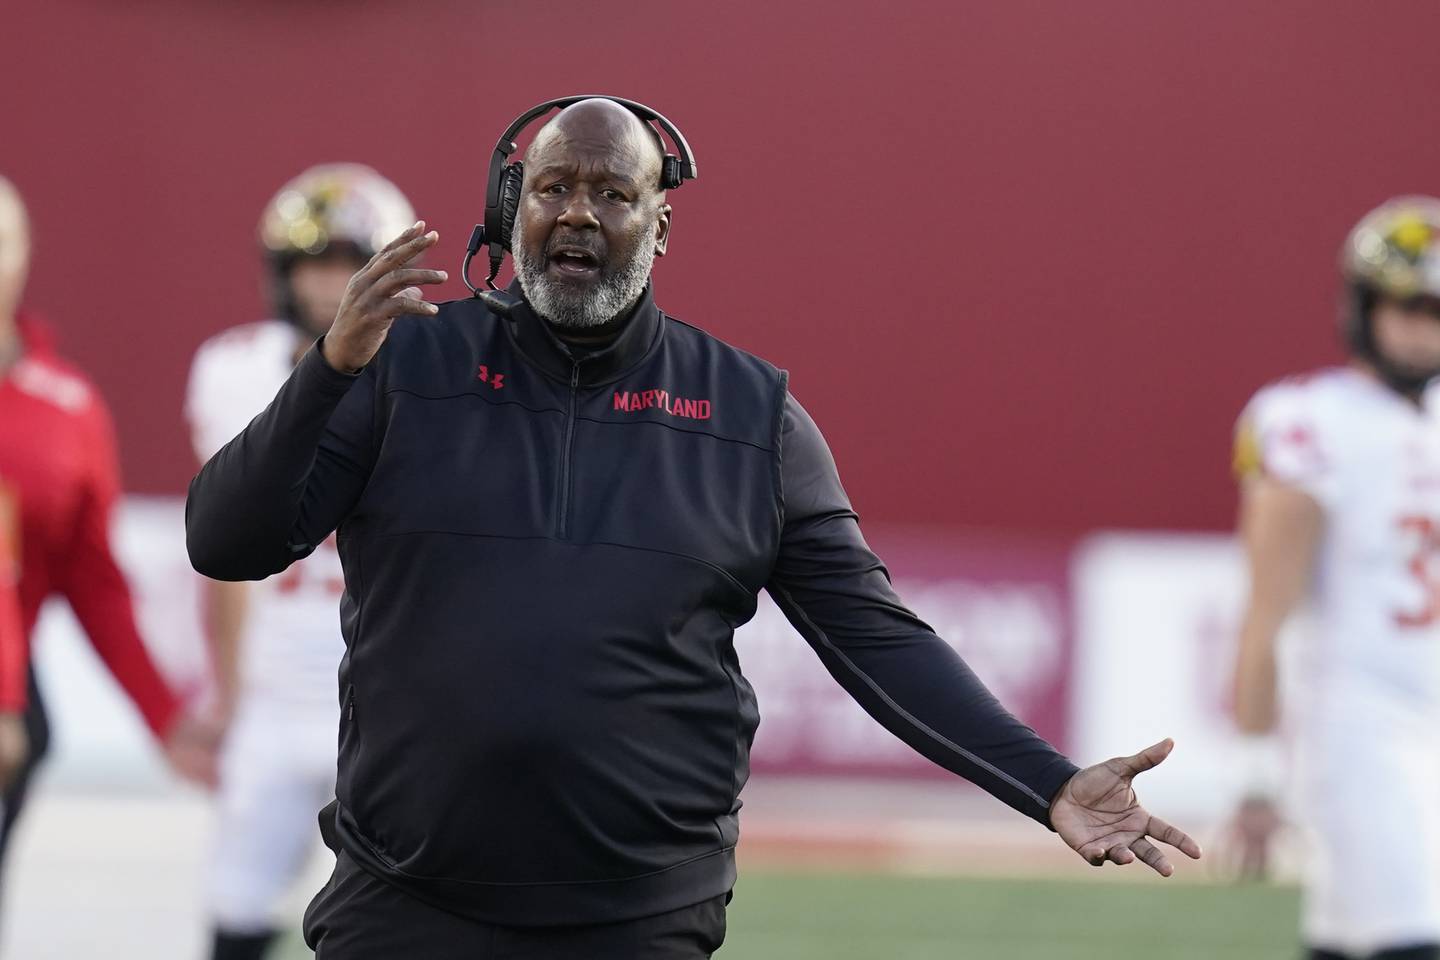 Maryland head coach Mike Locksley questions a call during the second half of an NCAA college football game against Indiana, Saturday, Oct. 15, 2022, in Bloomington, Ind